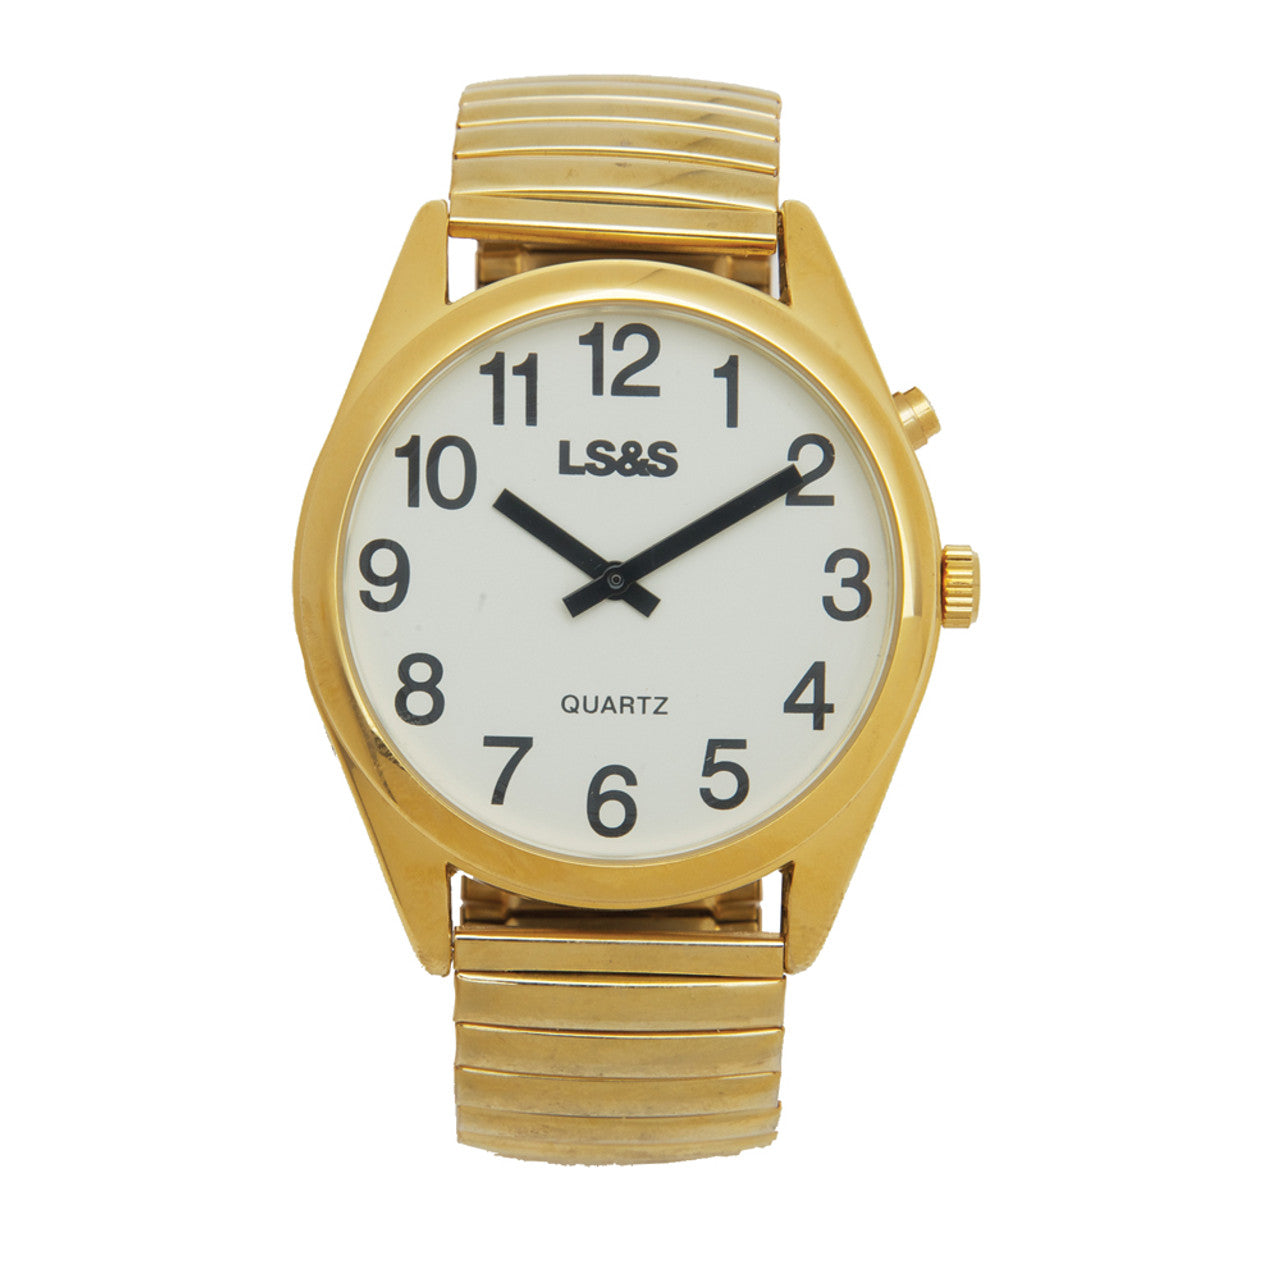 XL 1 Button Talking Watch Gold Tone and White Face